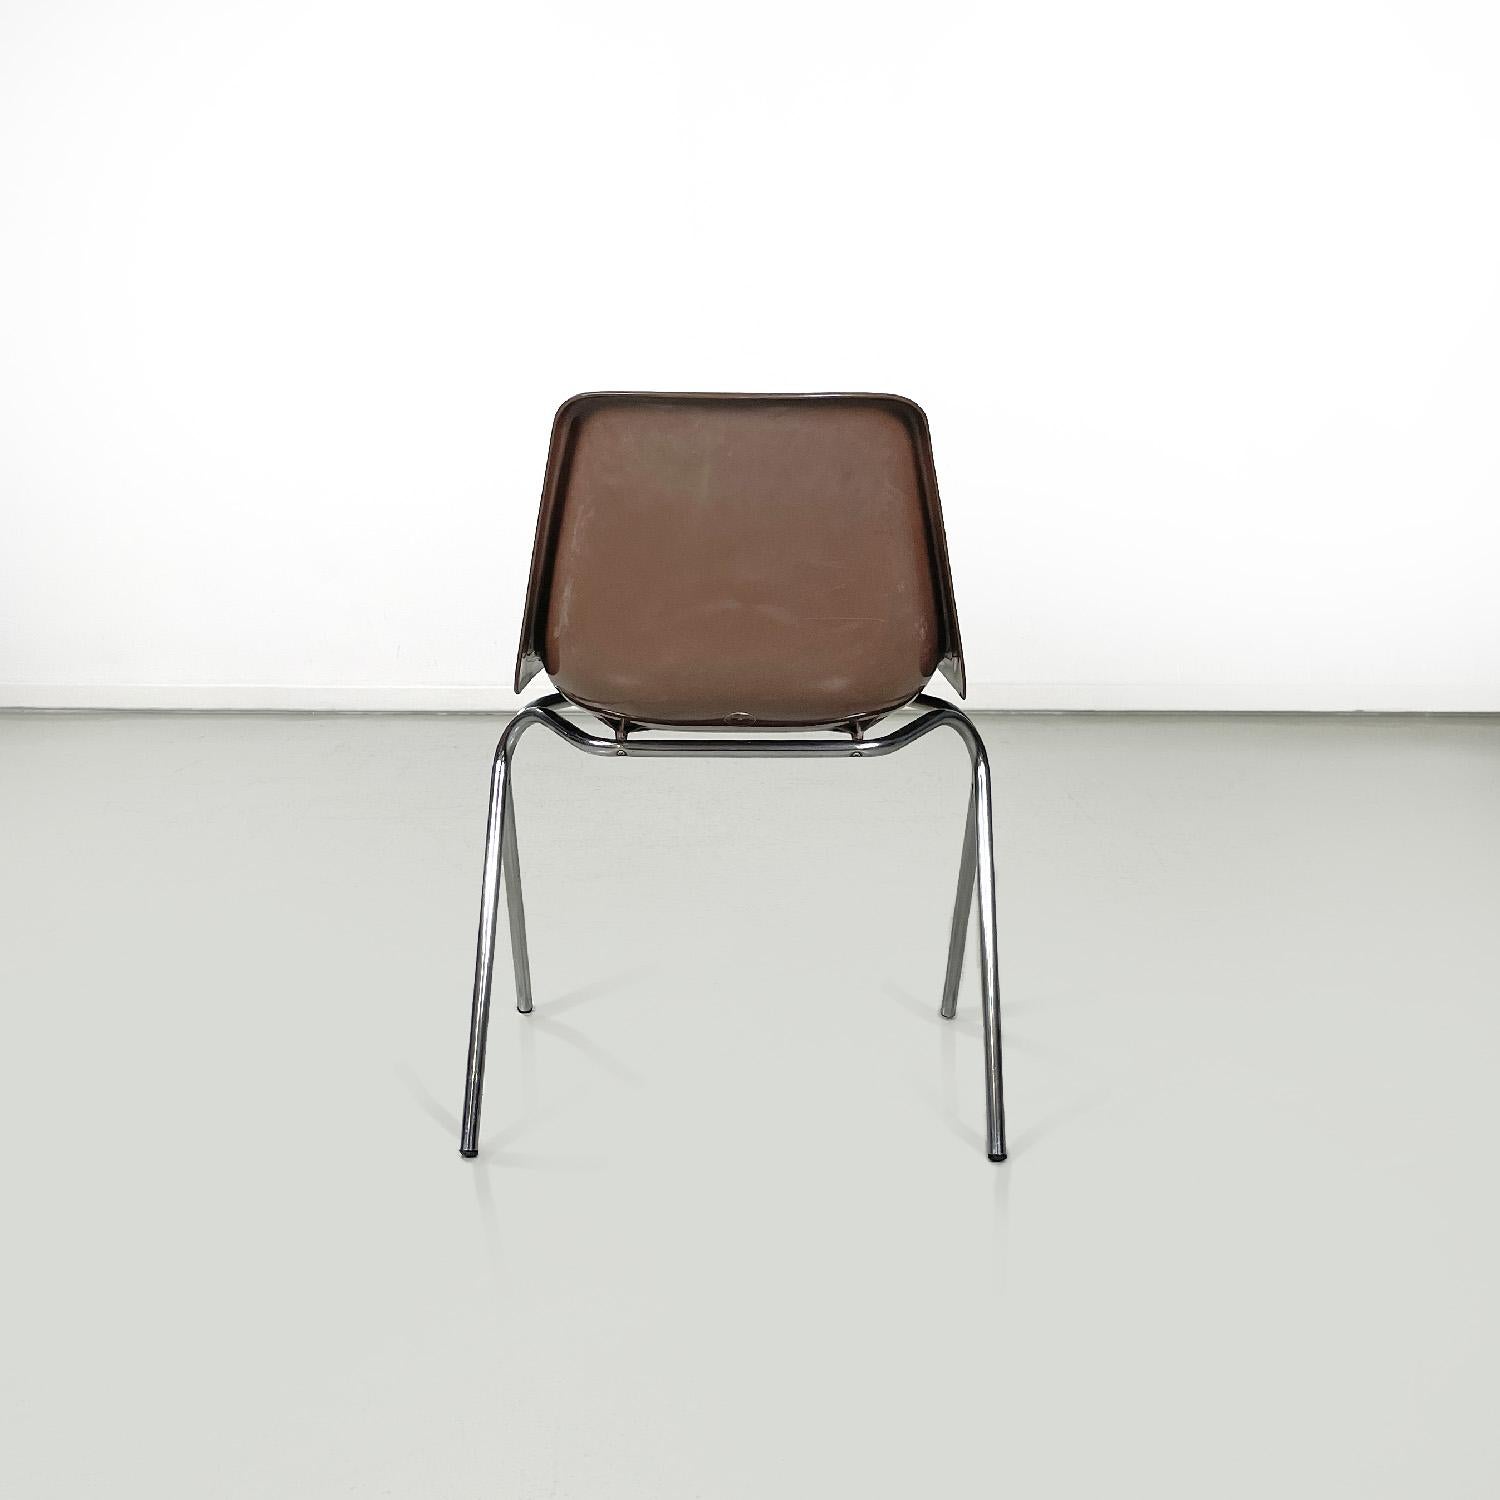 Late 20th Century Italian modern stackable chairs by Proinco in brown plastic, 1970s For Sale